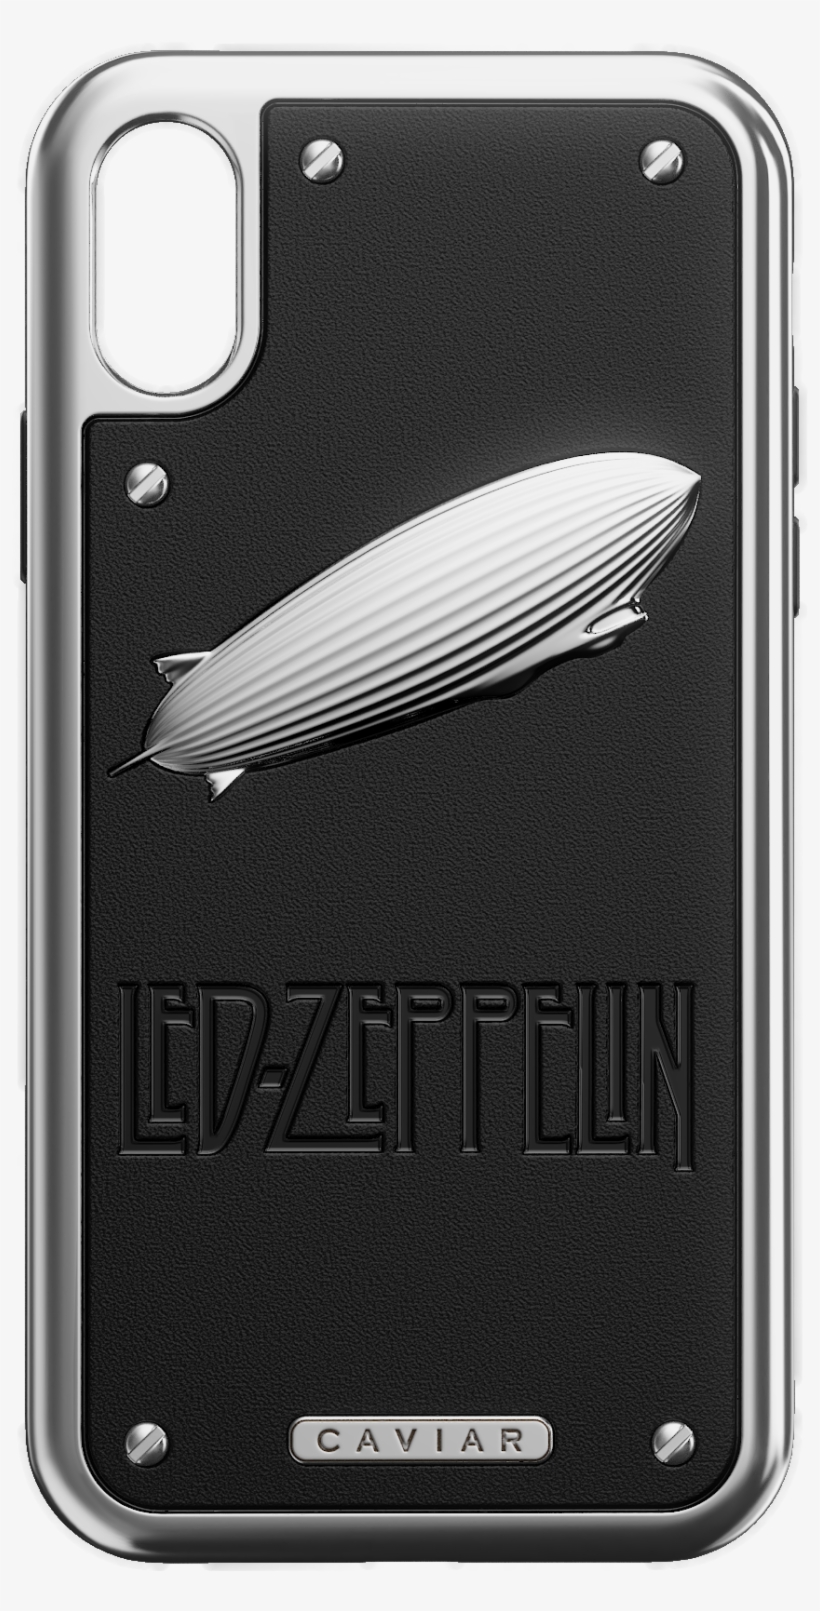 Led Zeppelin Iphone X Case By Caviar - Iphone X, transparent png #1853853